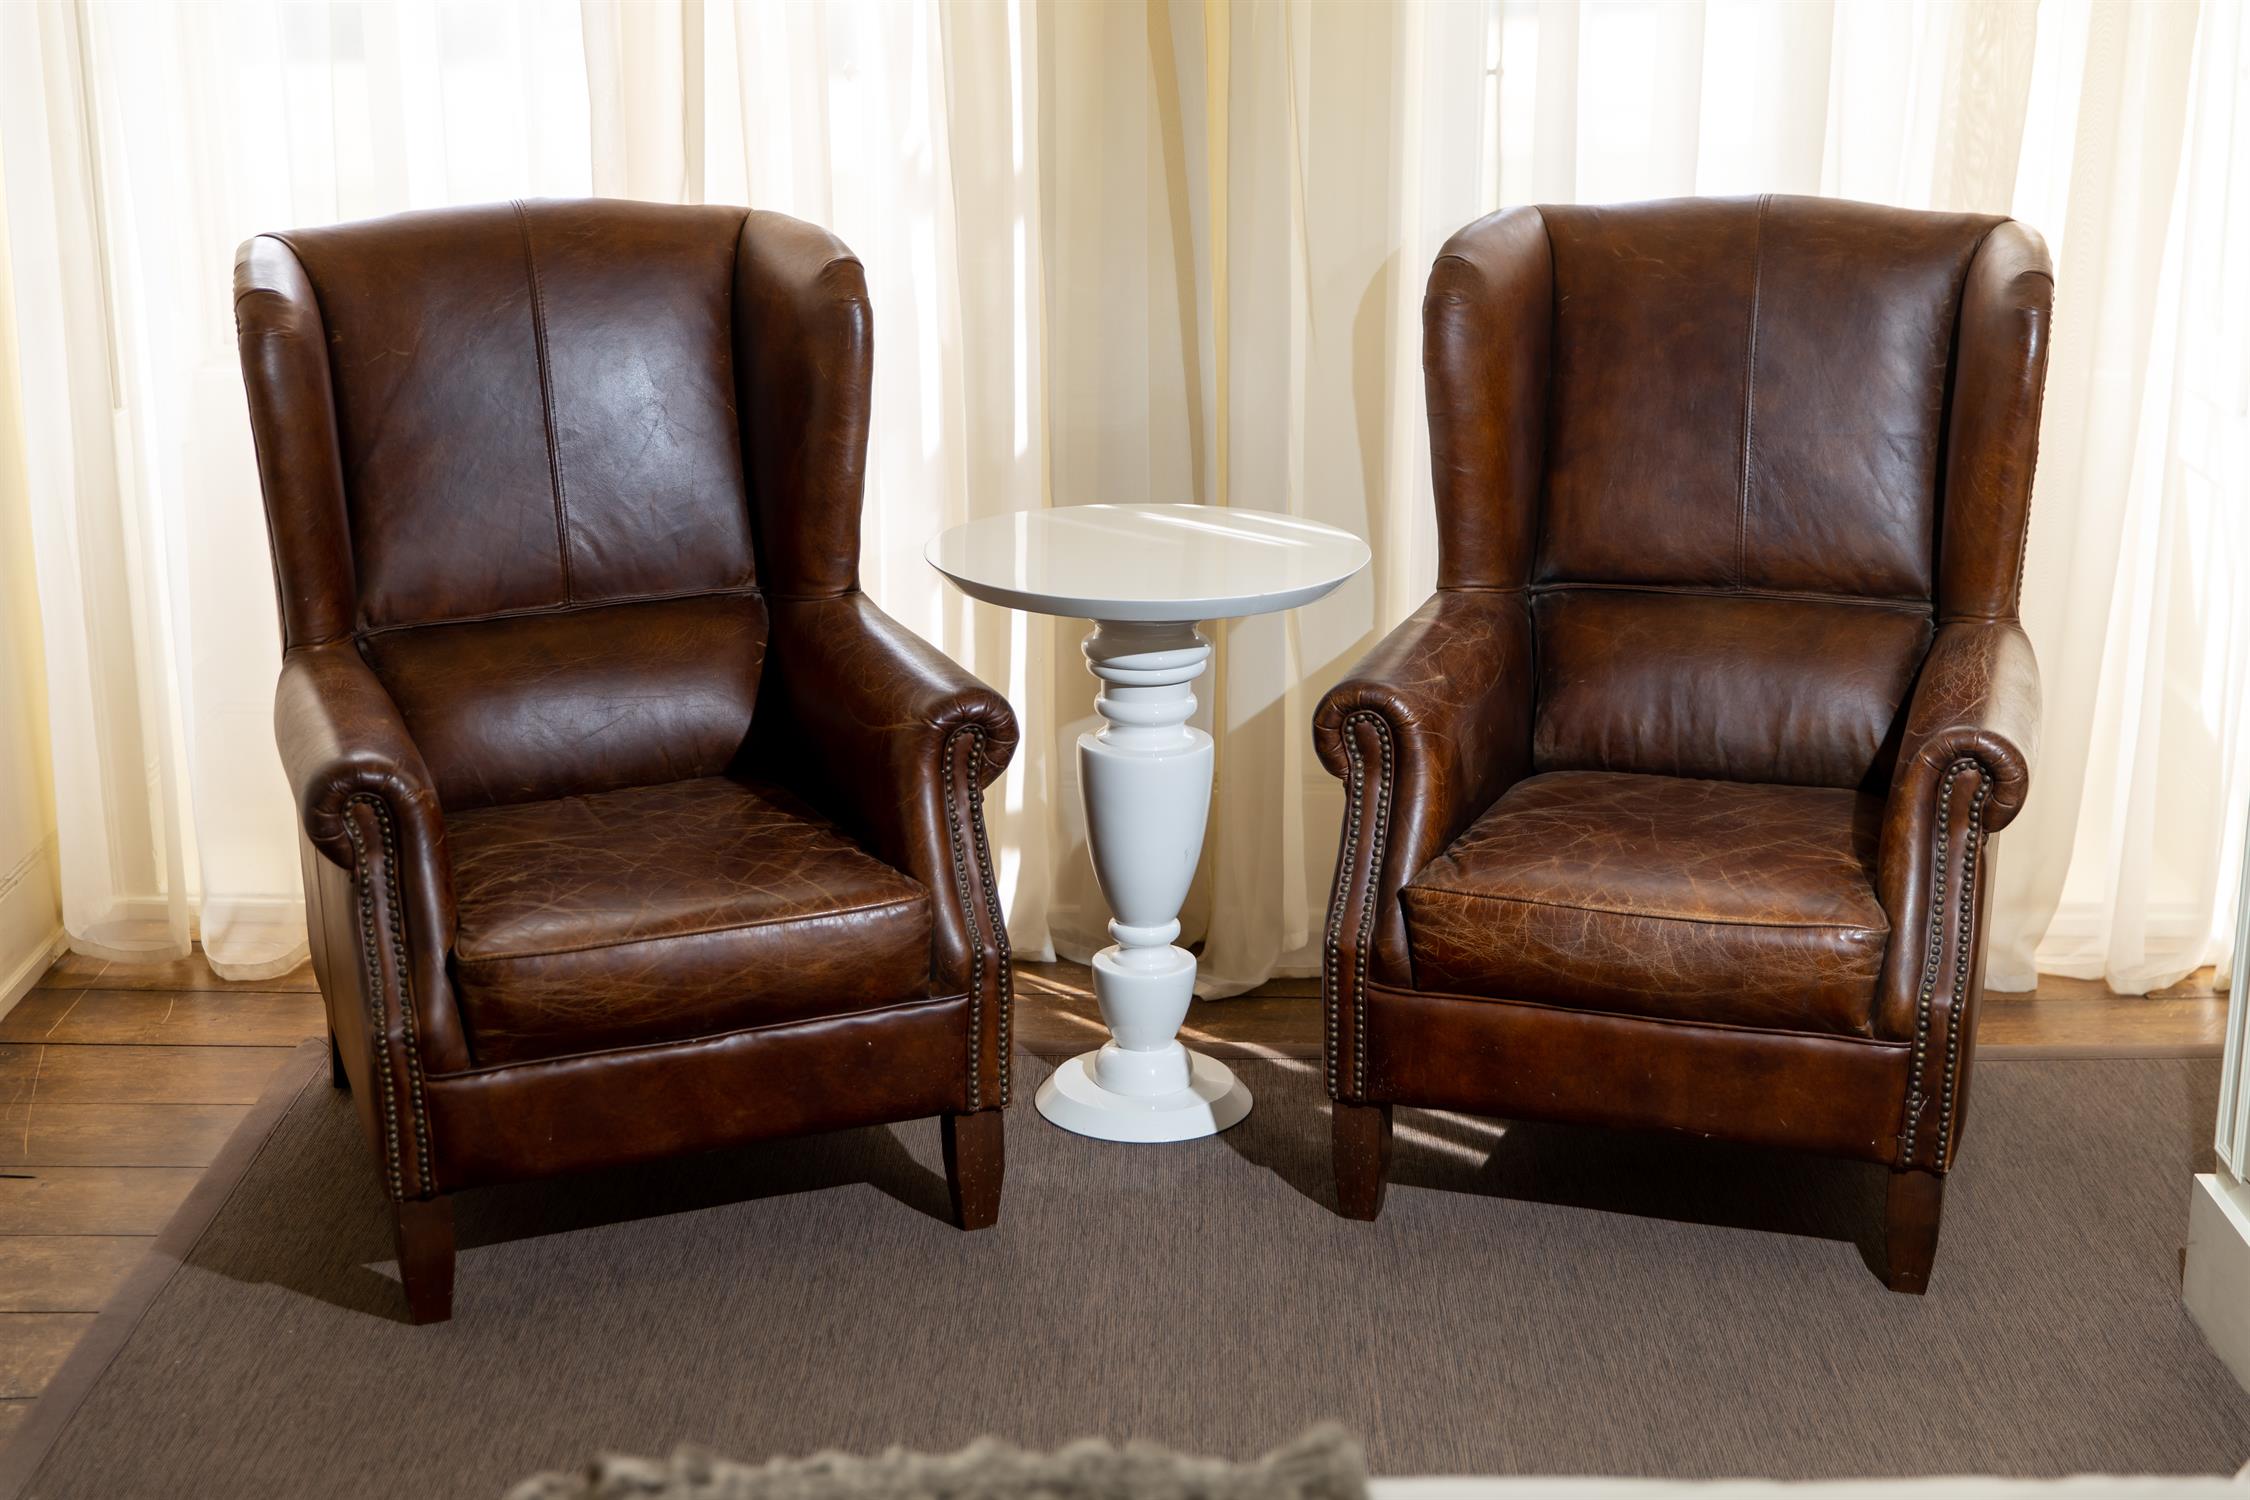 A PAIR OF LEATHER WING BACK CHAIRS, 20TH CENTURY